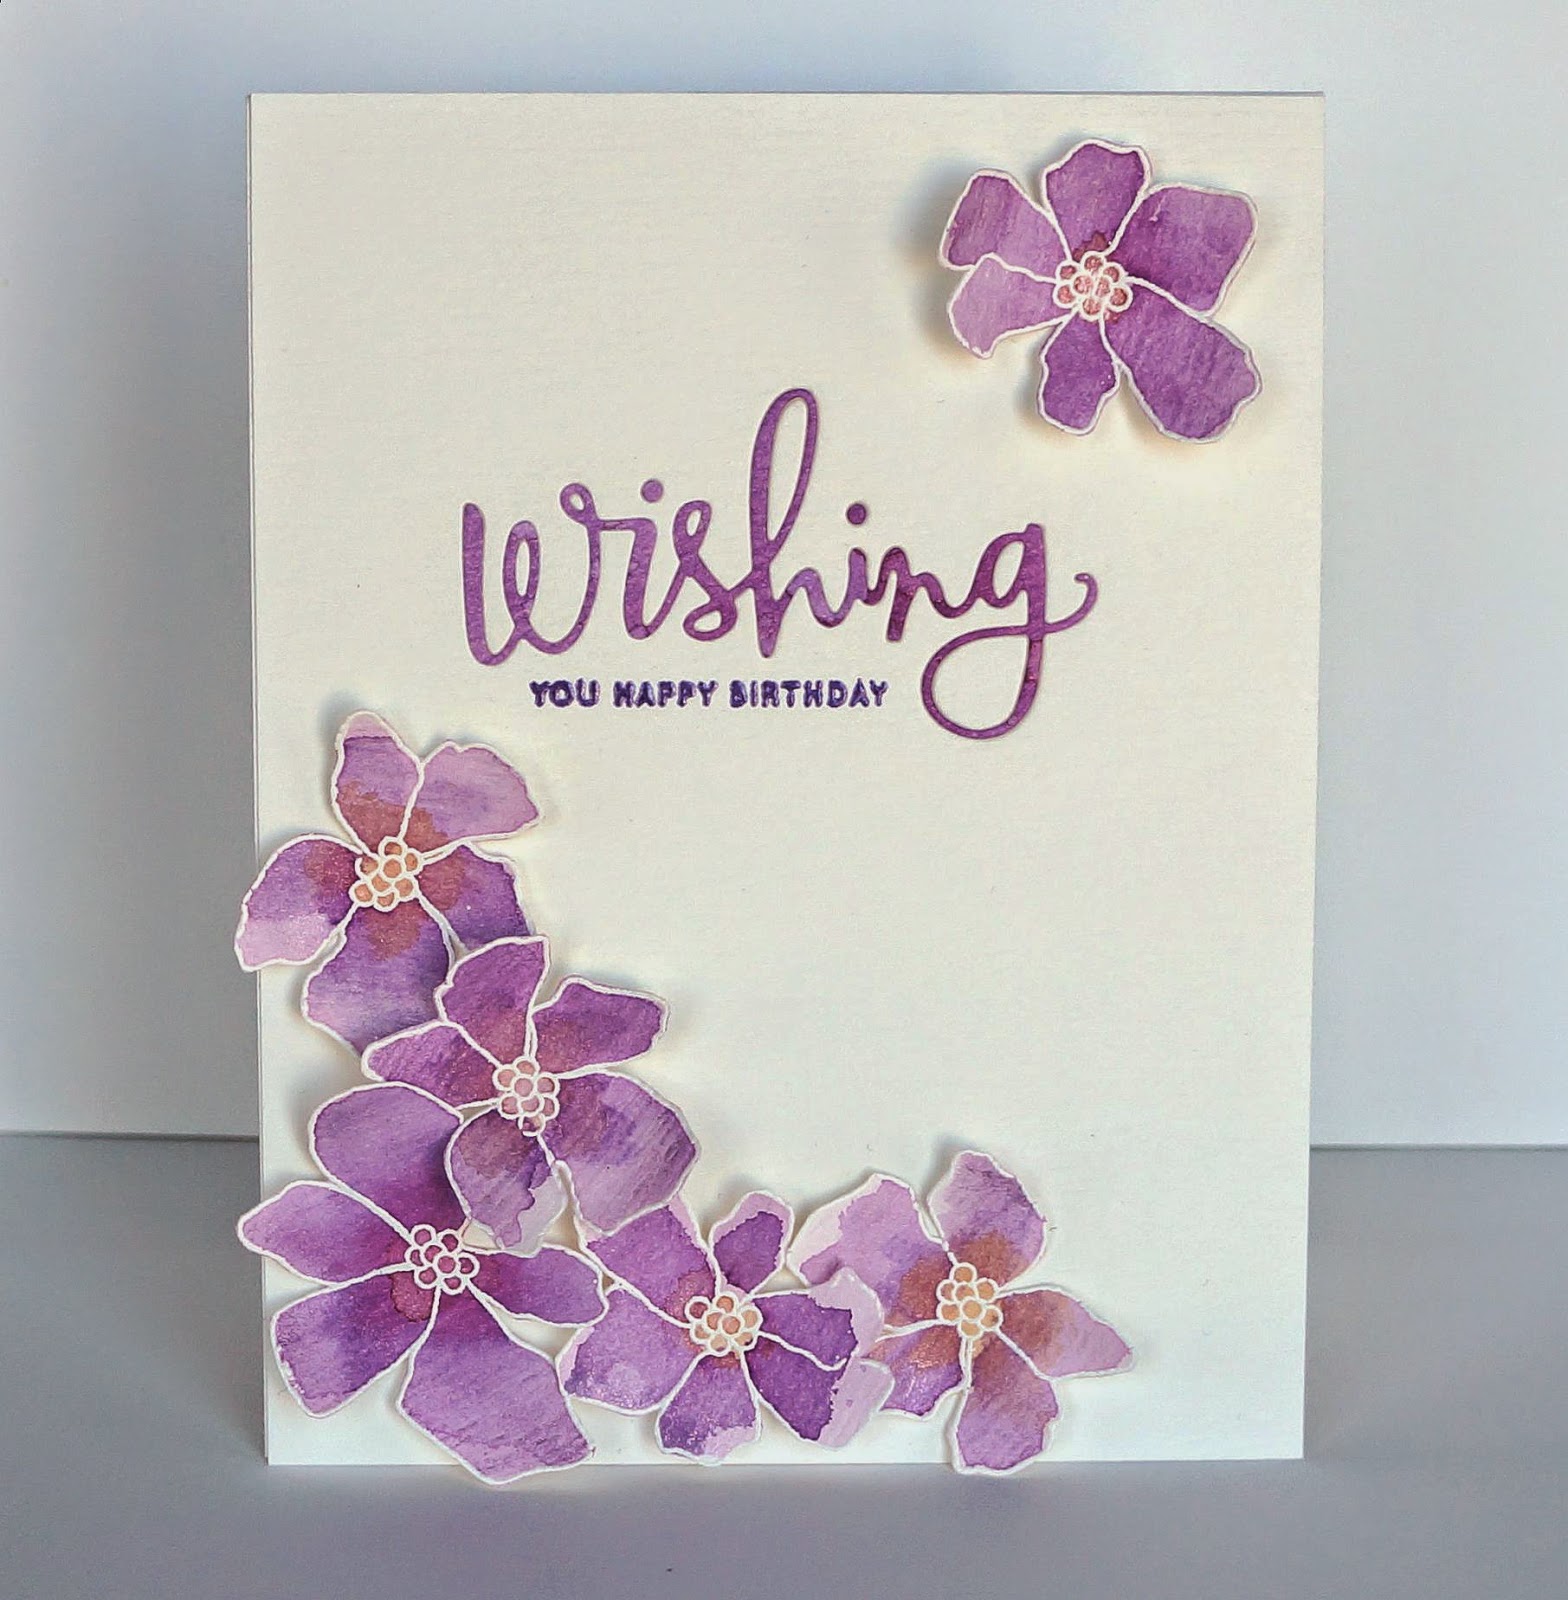 10 Beautiful and Impressive Birthday Cards to Send to Your Beloved Wife 4